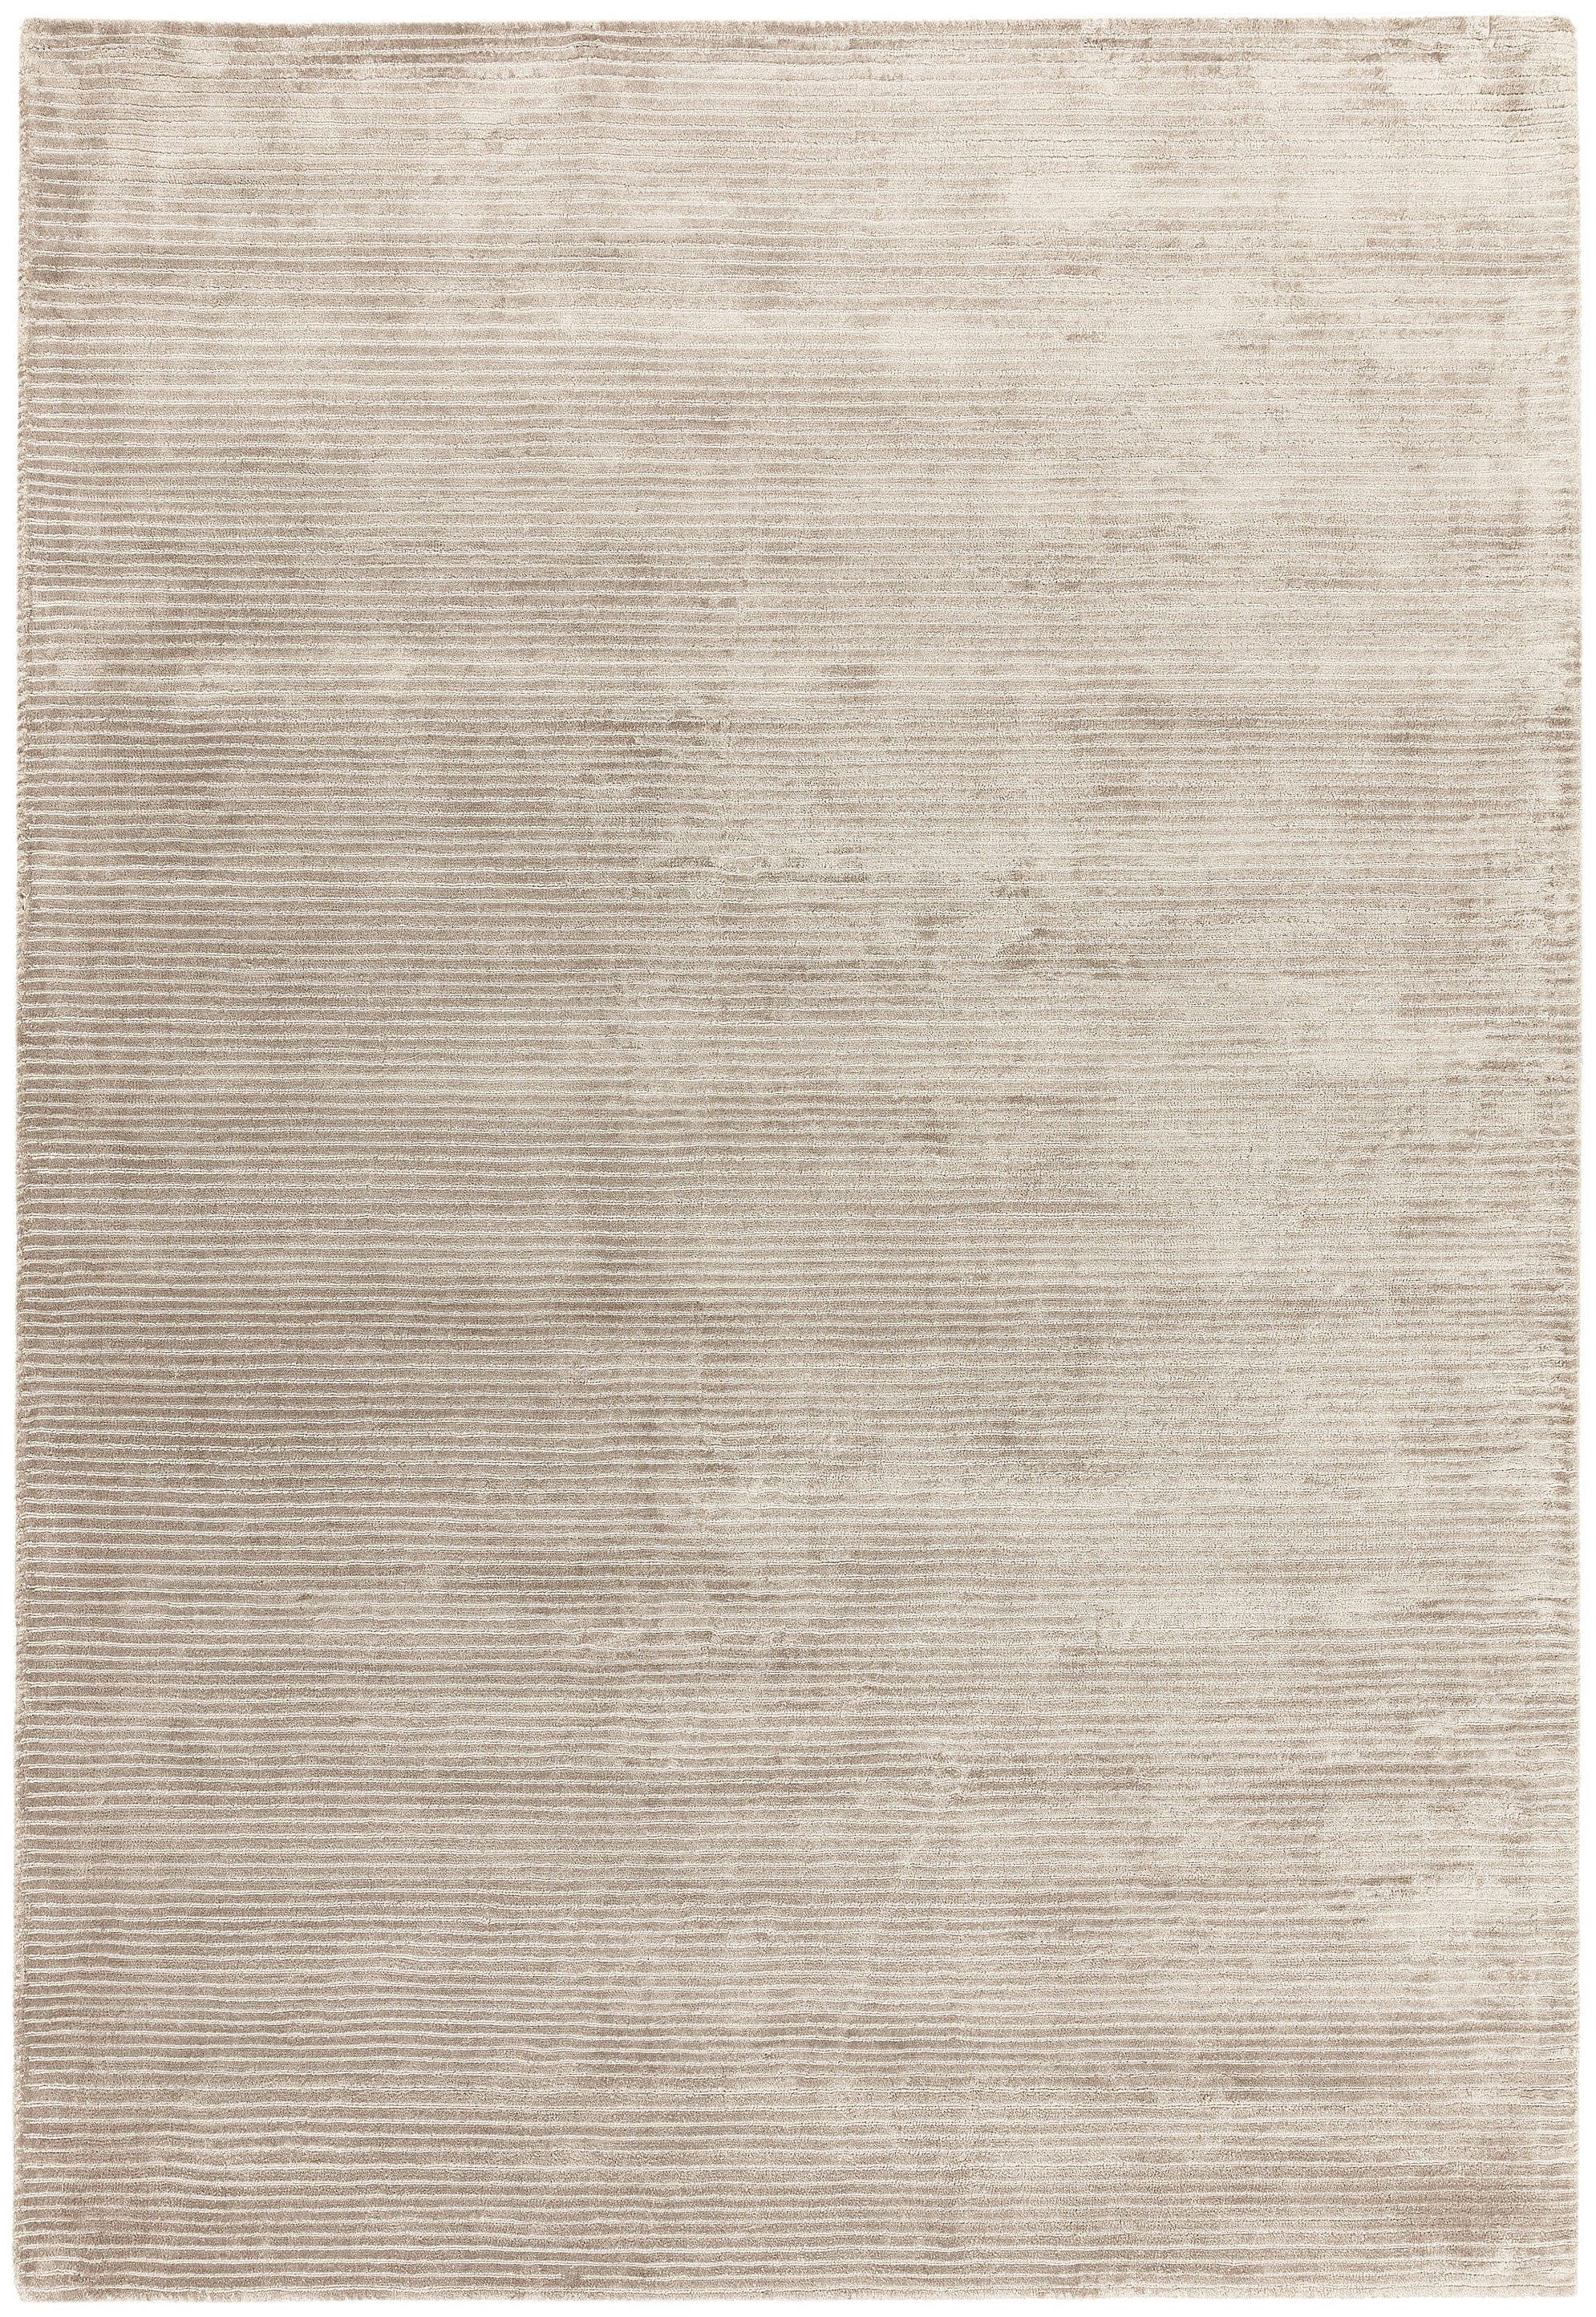 Bellagio Biscuit Hand Woven Contemporary Plain Viscose Rug